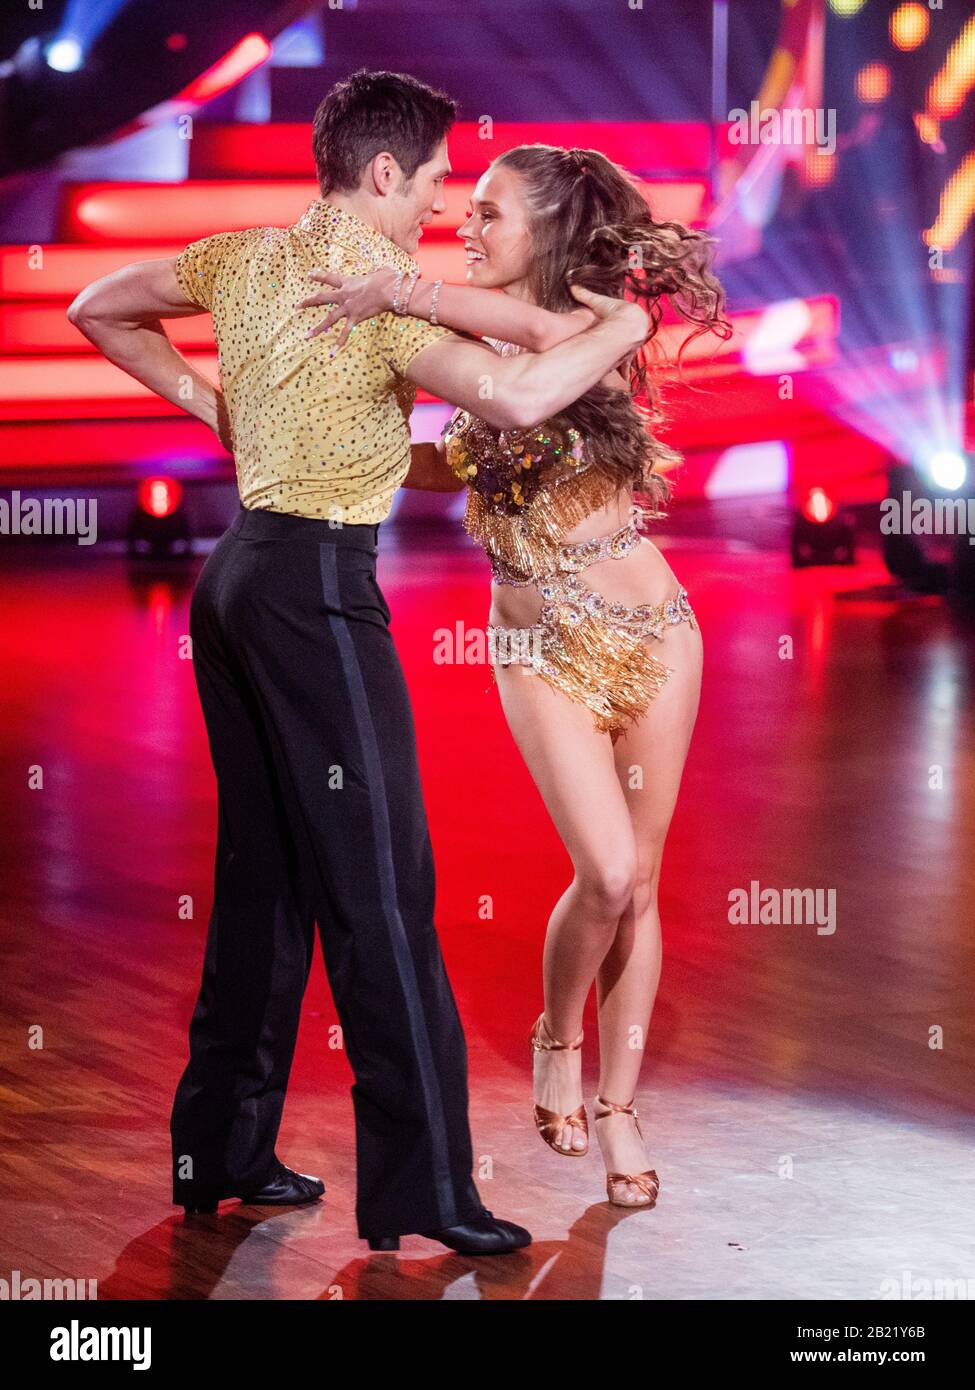 Cologne, Germany. 28th Feb, 2020. Laura Müller, TV personality, and Christian Polanc, professional dancer, dance in the RTL dance show 'Let's Dance' at the Coloneum. Credit: Rolf Vennenbernd/dpa/Alamy Live News Stock Photo